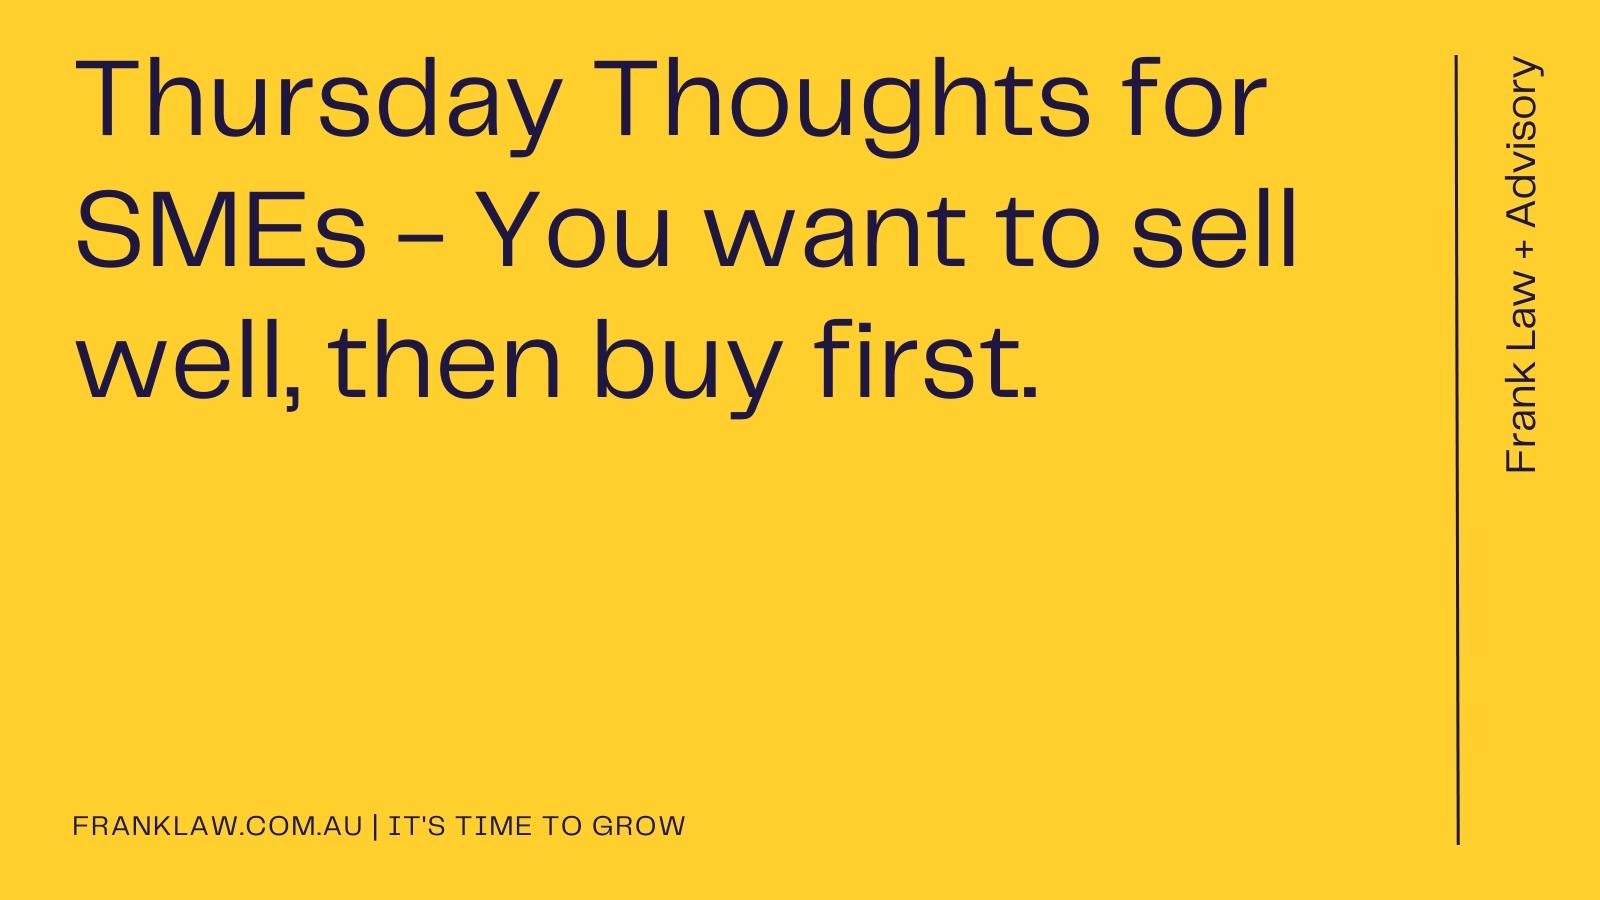 Thursday Thoughts for SMEs: You want to sell well, then buy first.